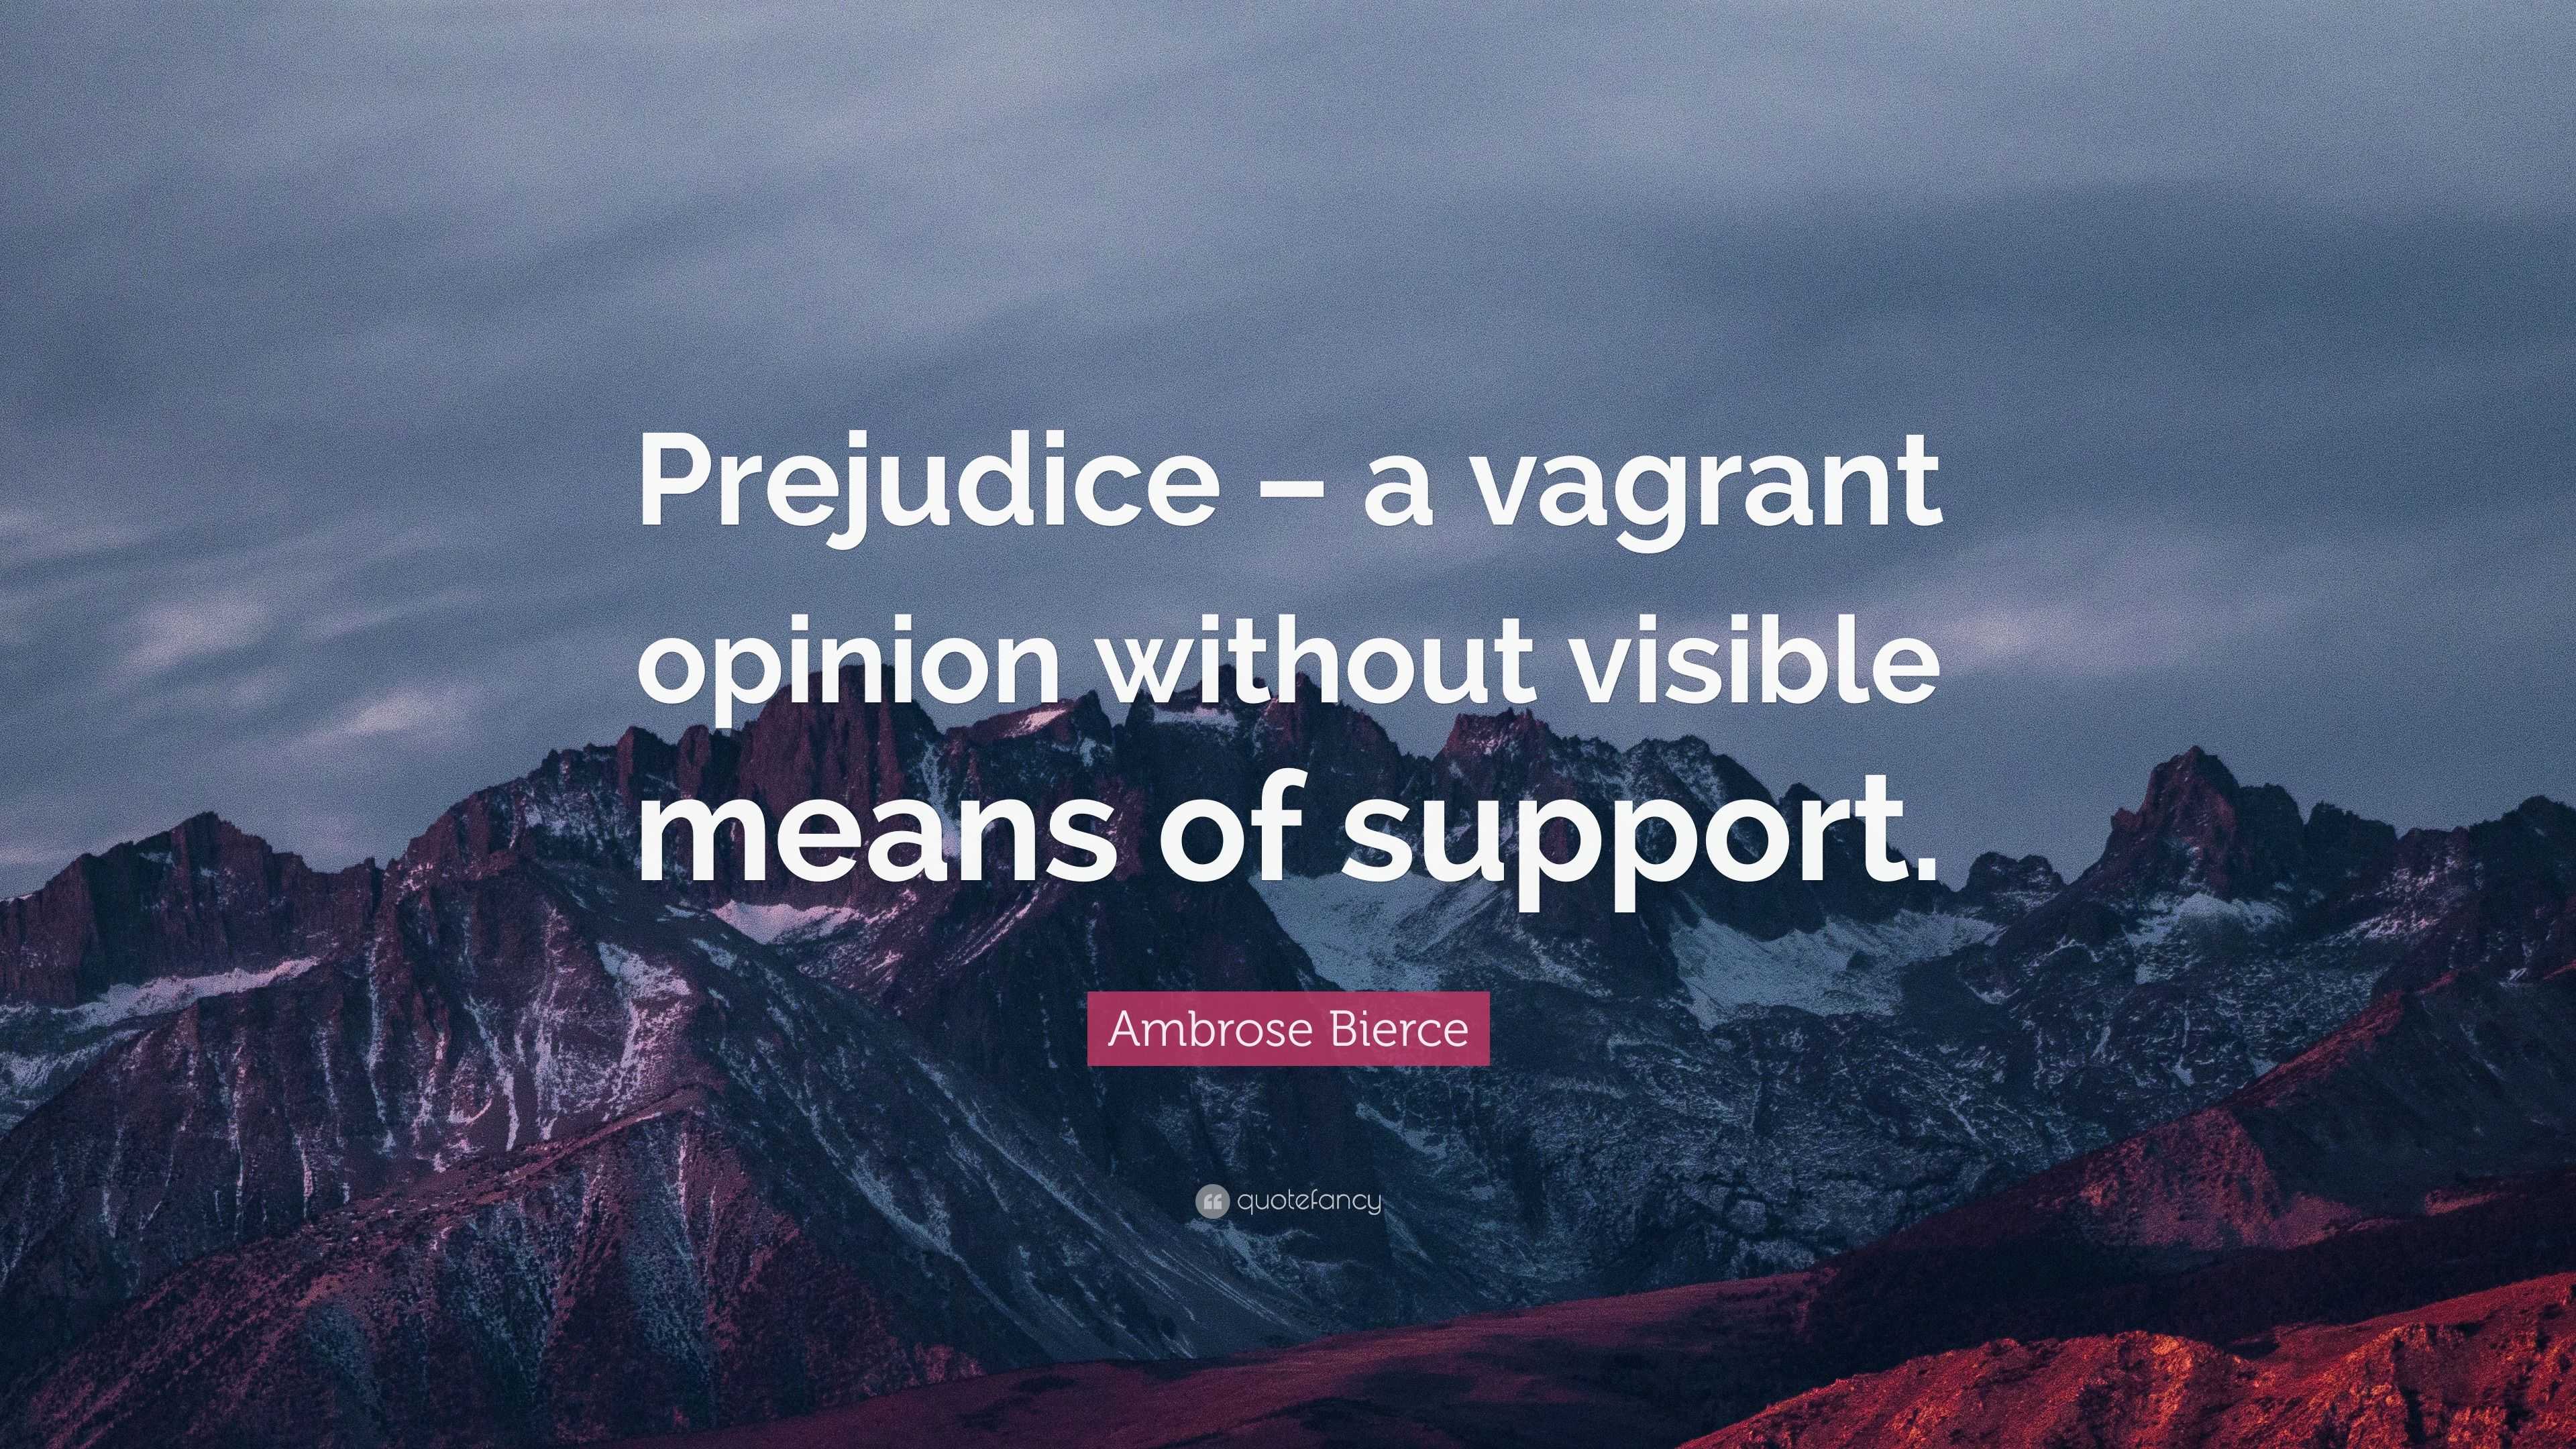 Ambrose Bierce Quote: “Prejudice – a vagrant opinion without visible ...